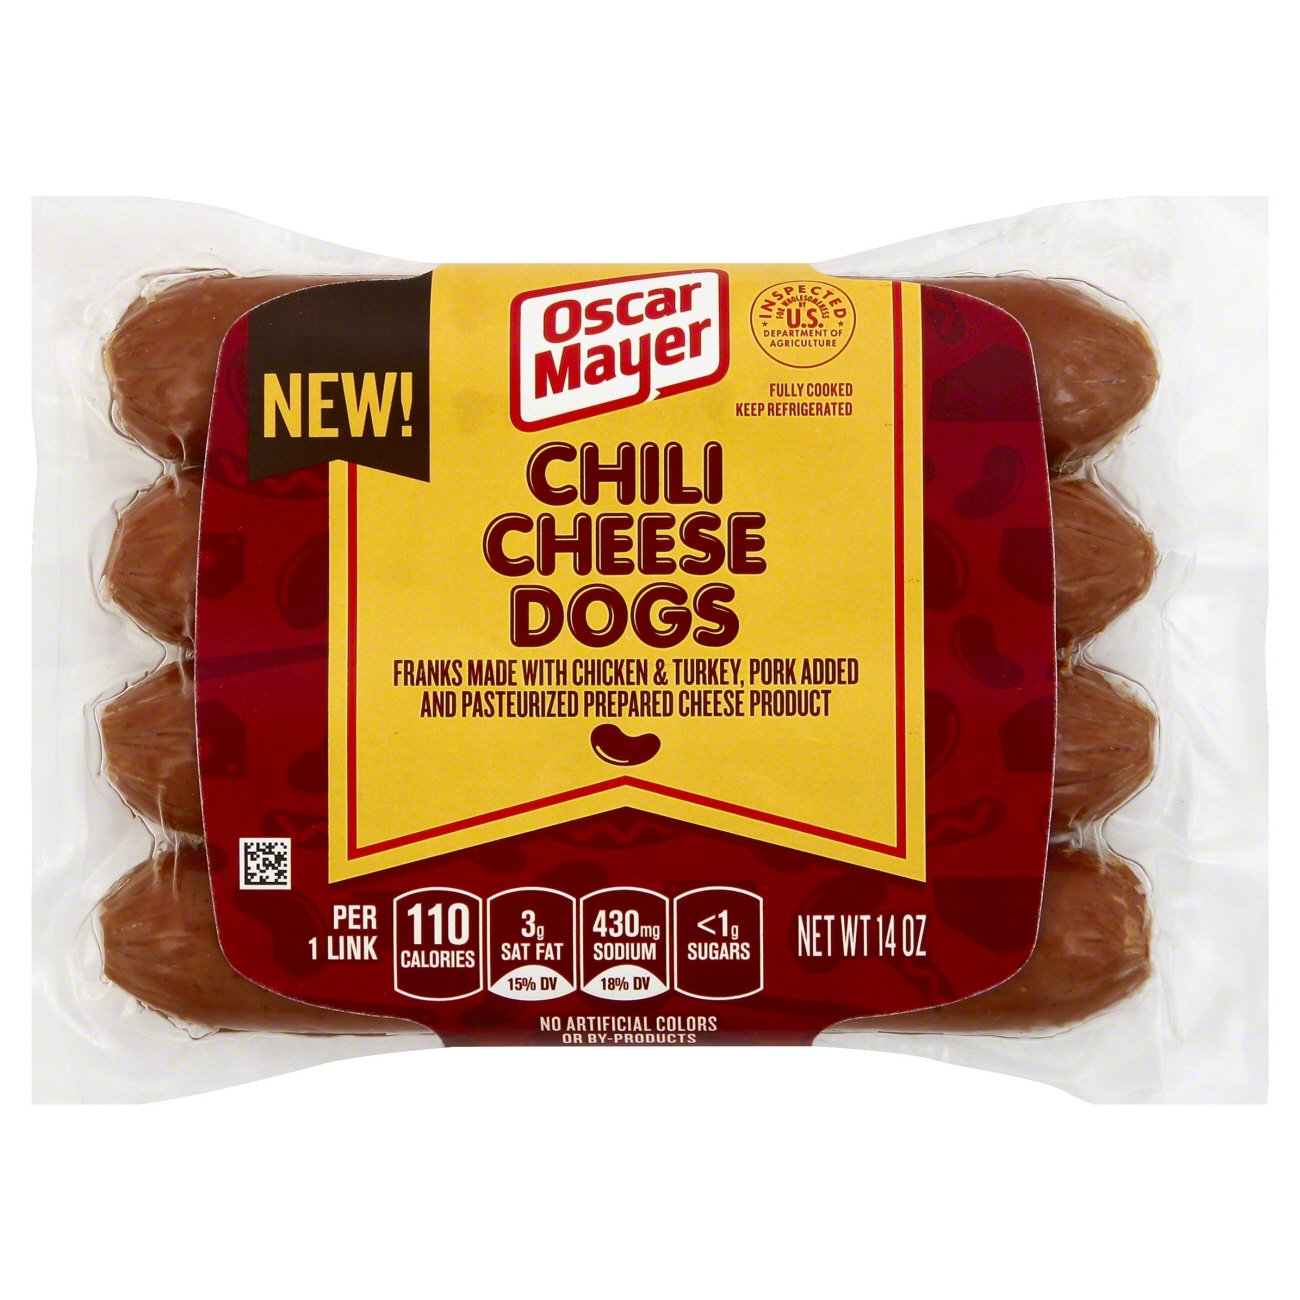 Oscar Mayer Chili Cheese Dogs - Shop Hot Dogs at H-E-B